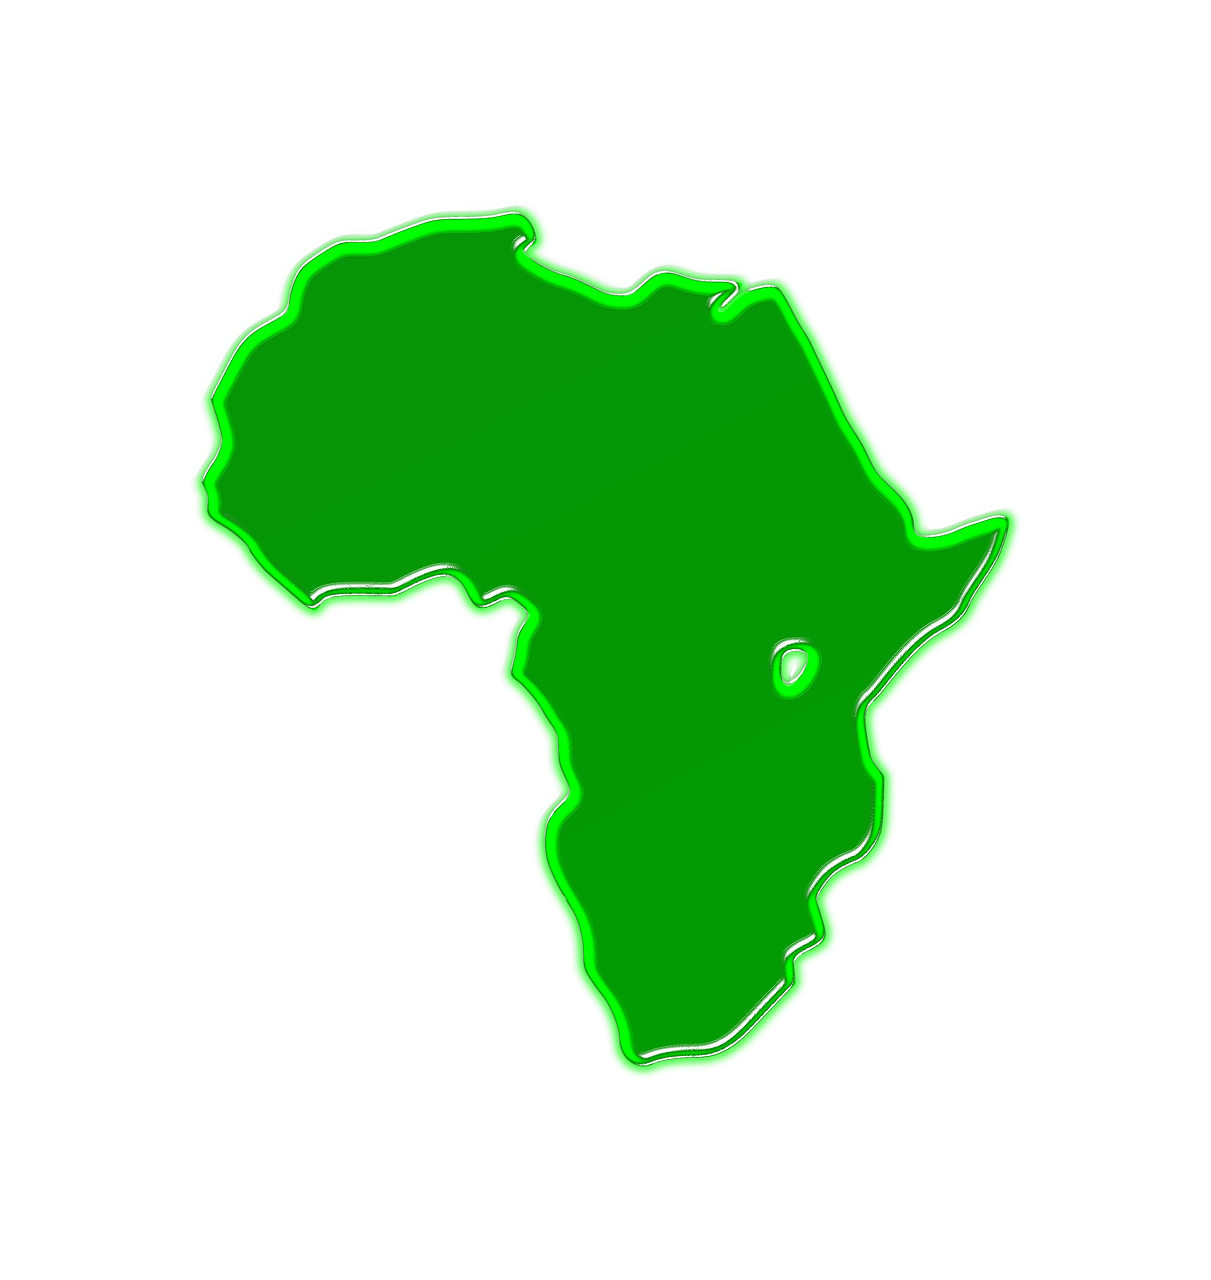 africa map geography free photo